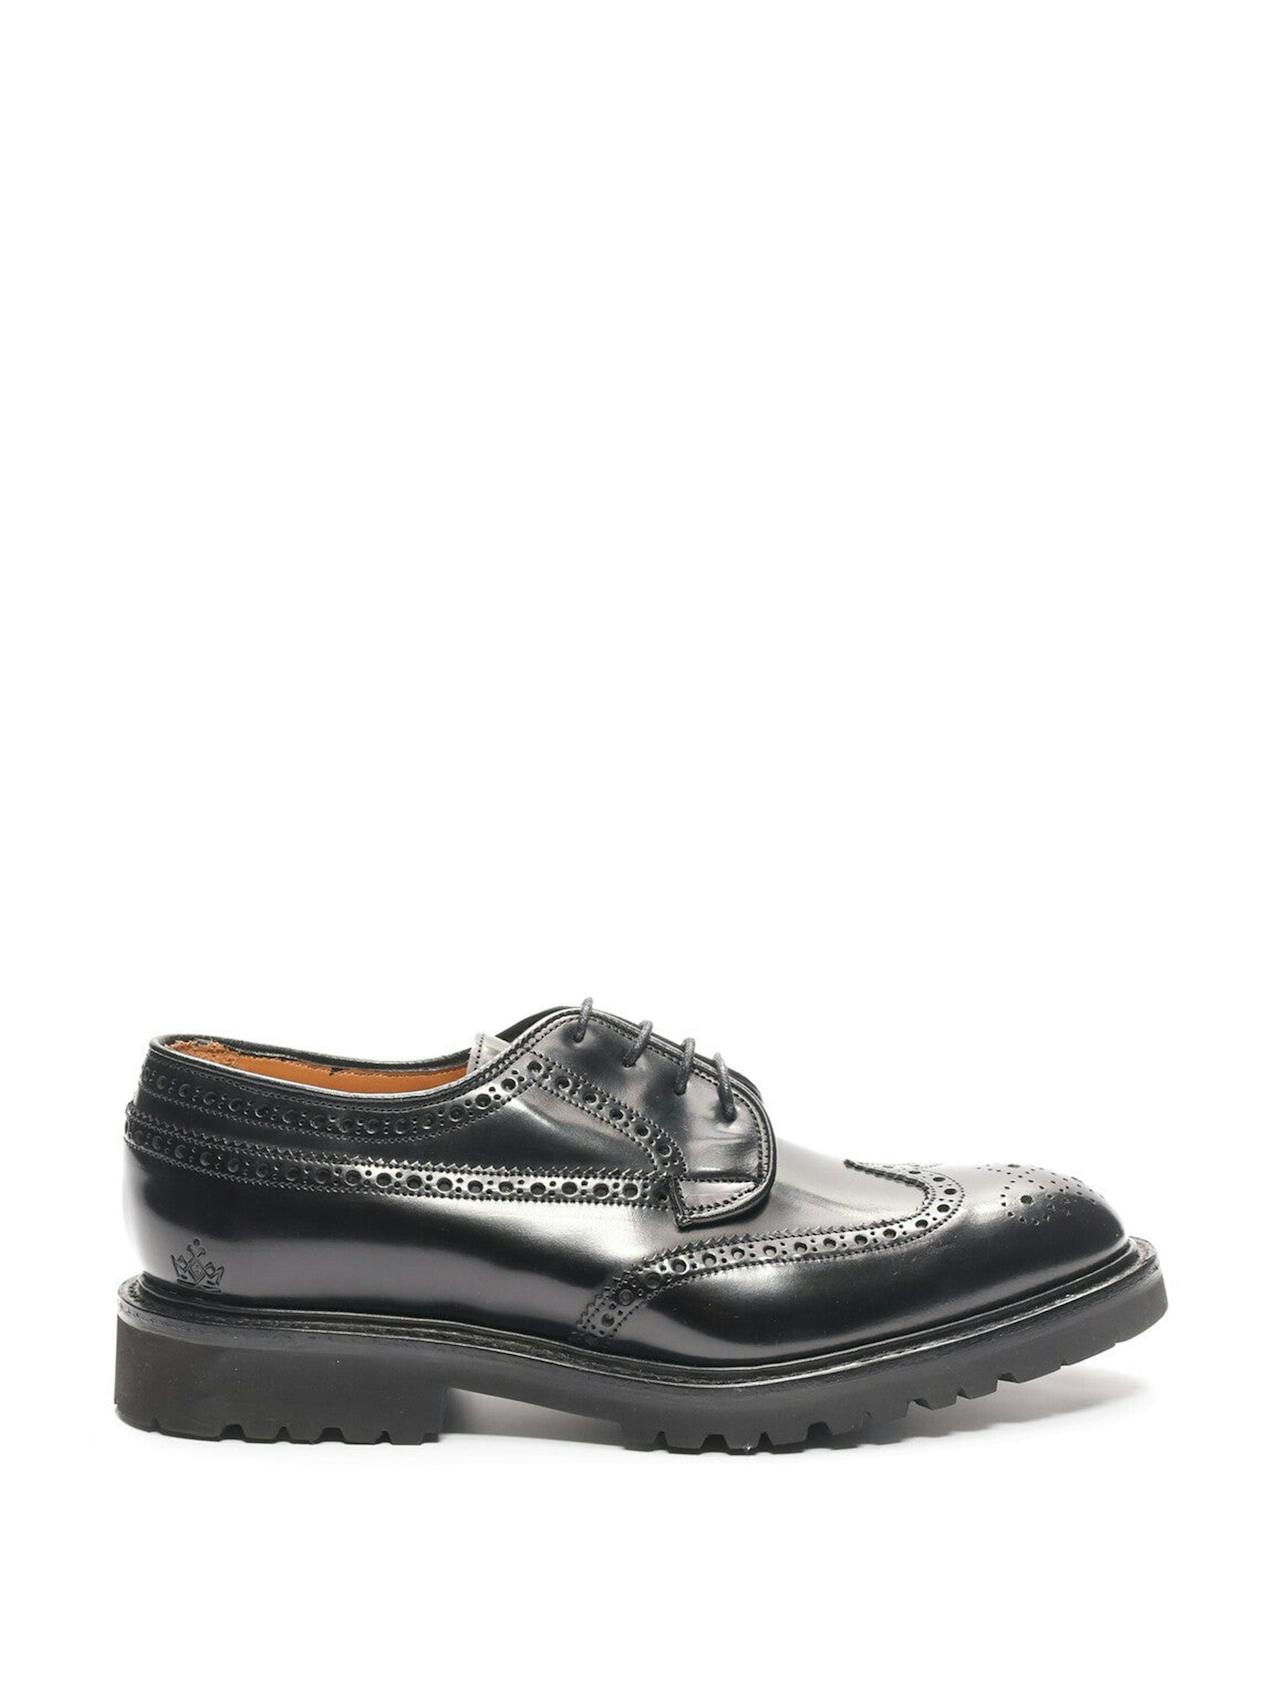 Black Guinevere Brogue derby shoes